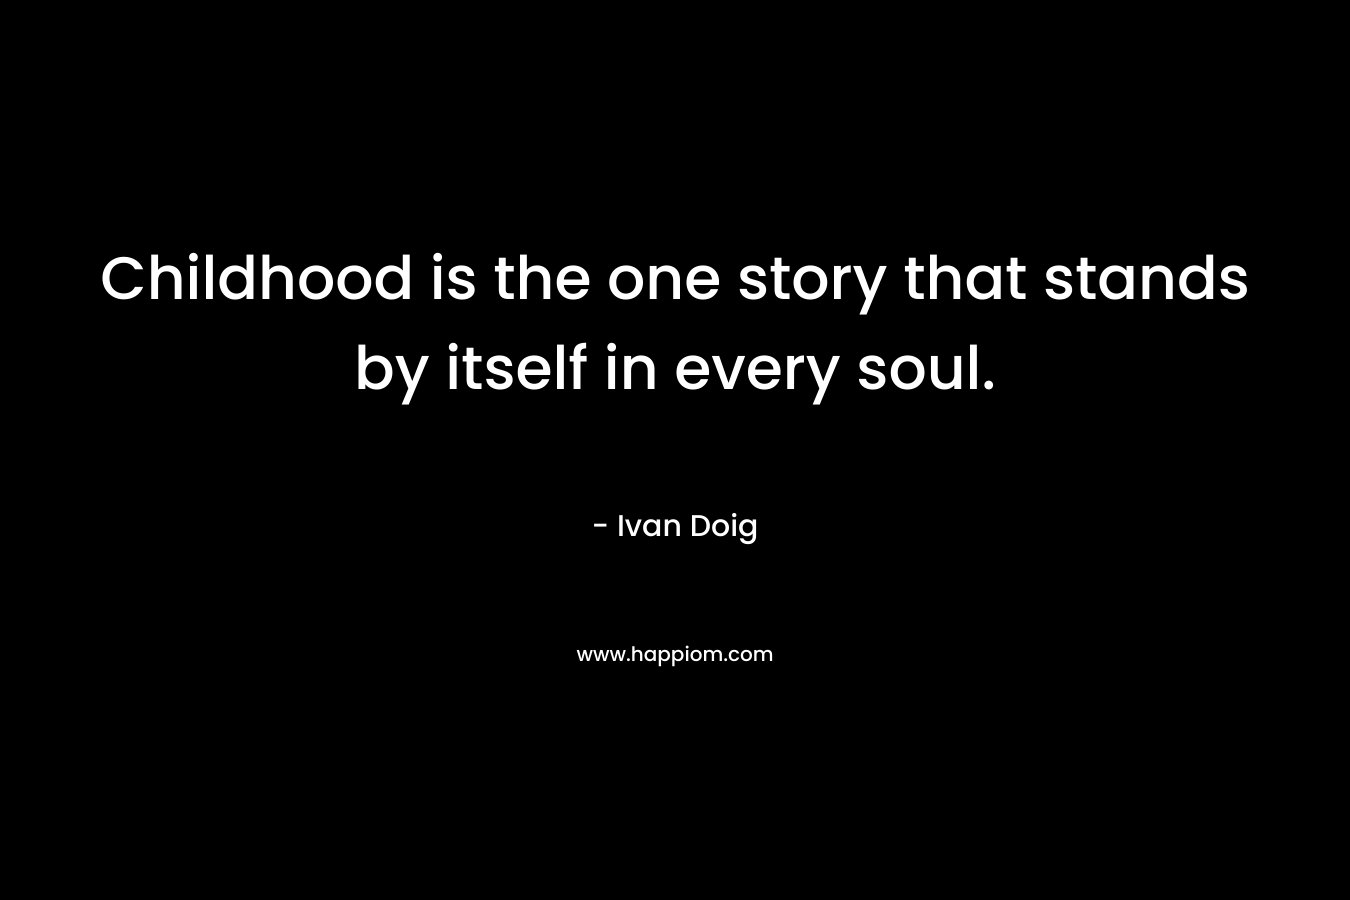 Childhood is the one story that stands by itself in every soul. – Ivan Doig